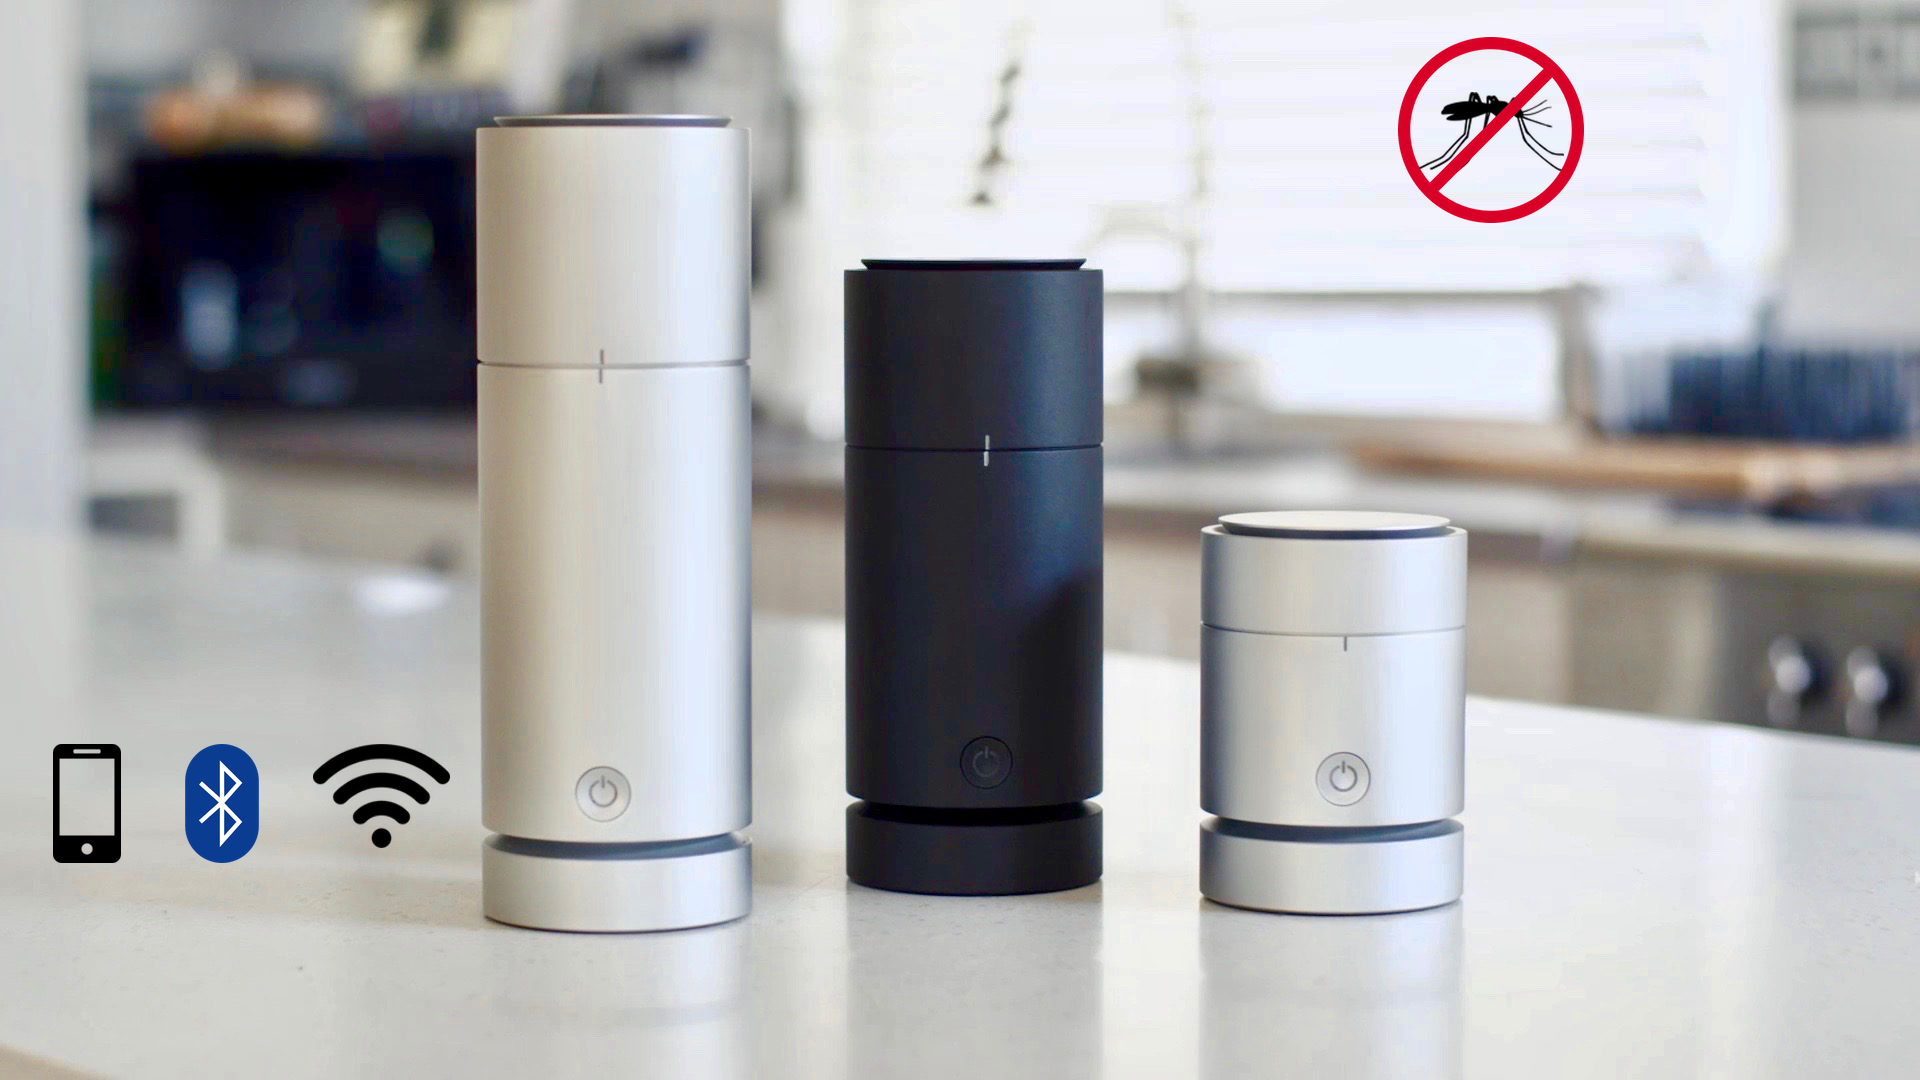 Vbreathe – World’s First Organic Air Purification & Mold Control System